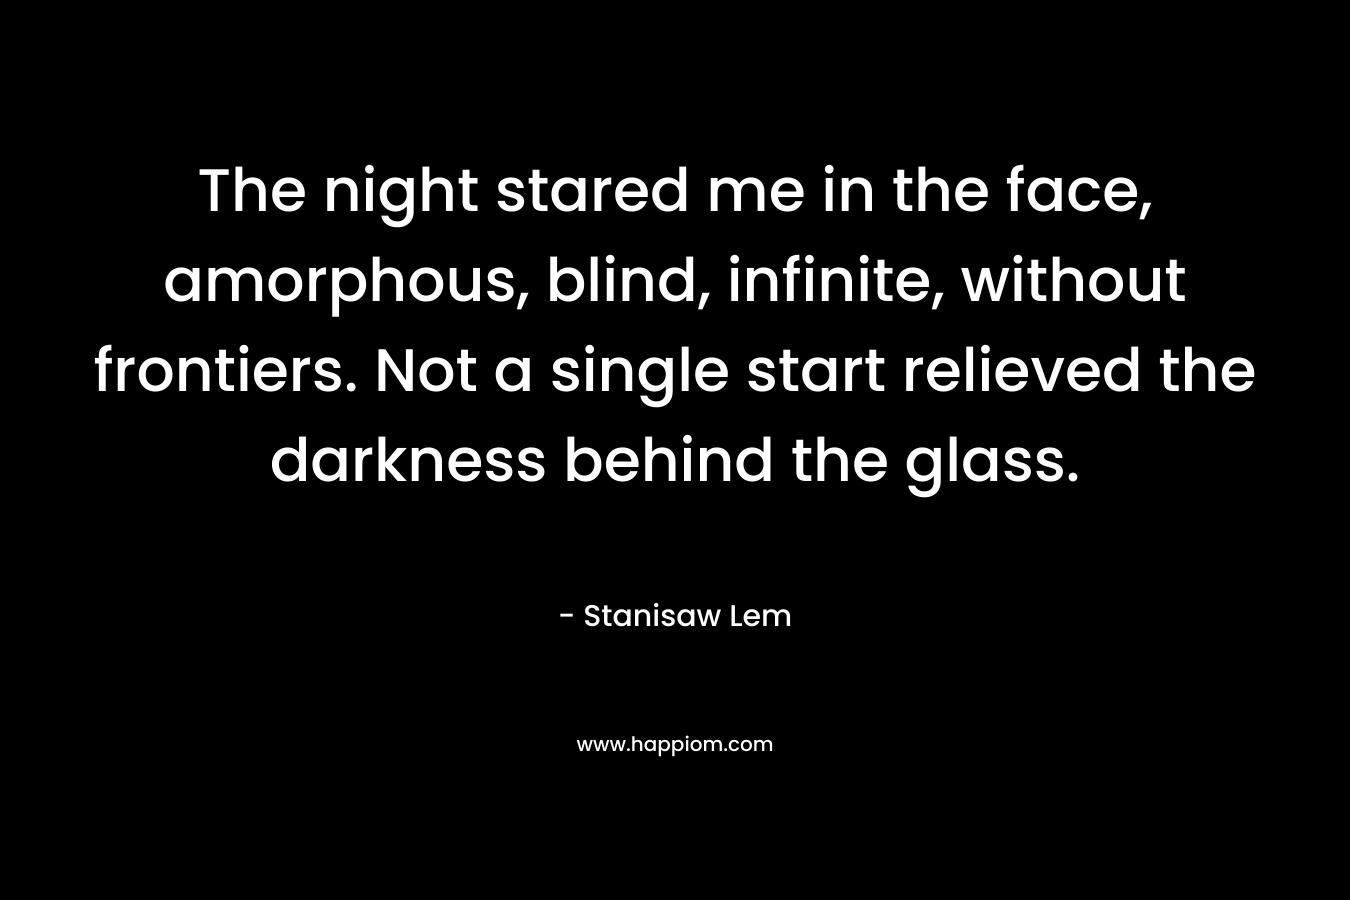 The night stared me in the face, amorphous, blind, infinite, without frontiers. Not a single start relieved the darkness behind the glass. – Stanisaw Lem